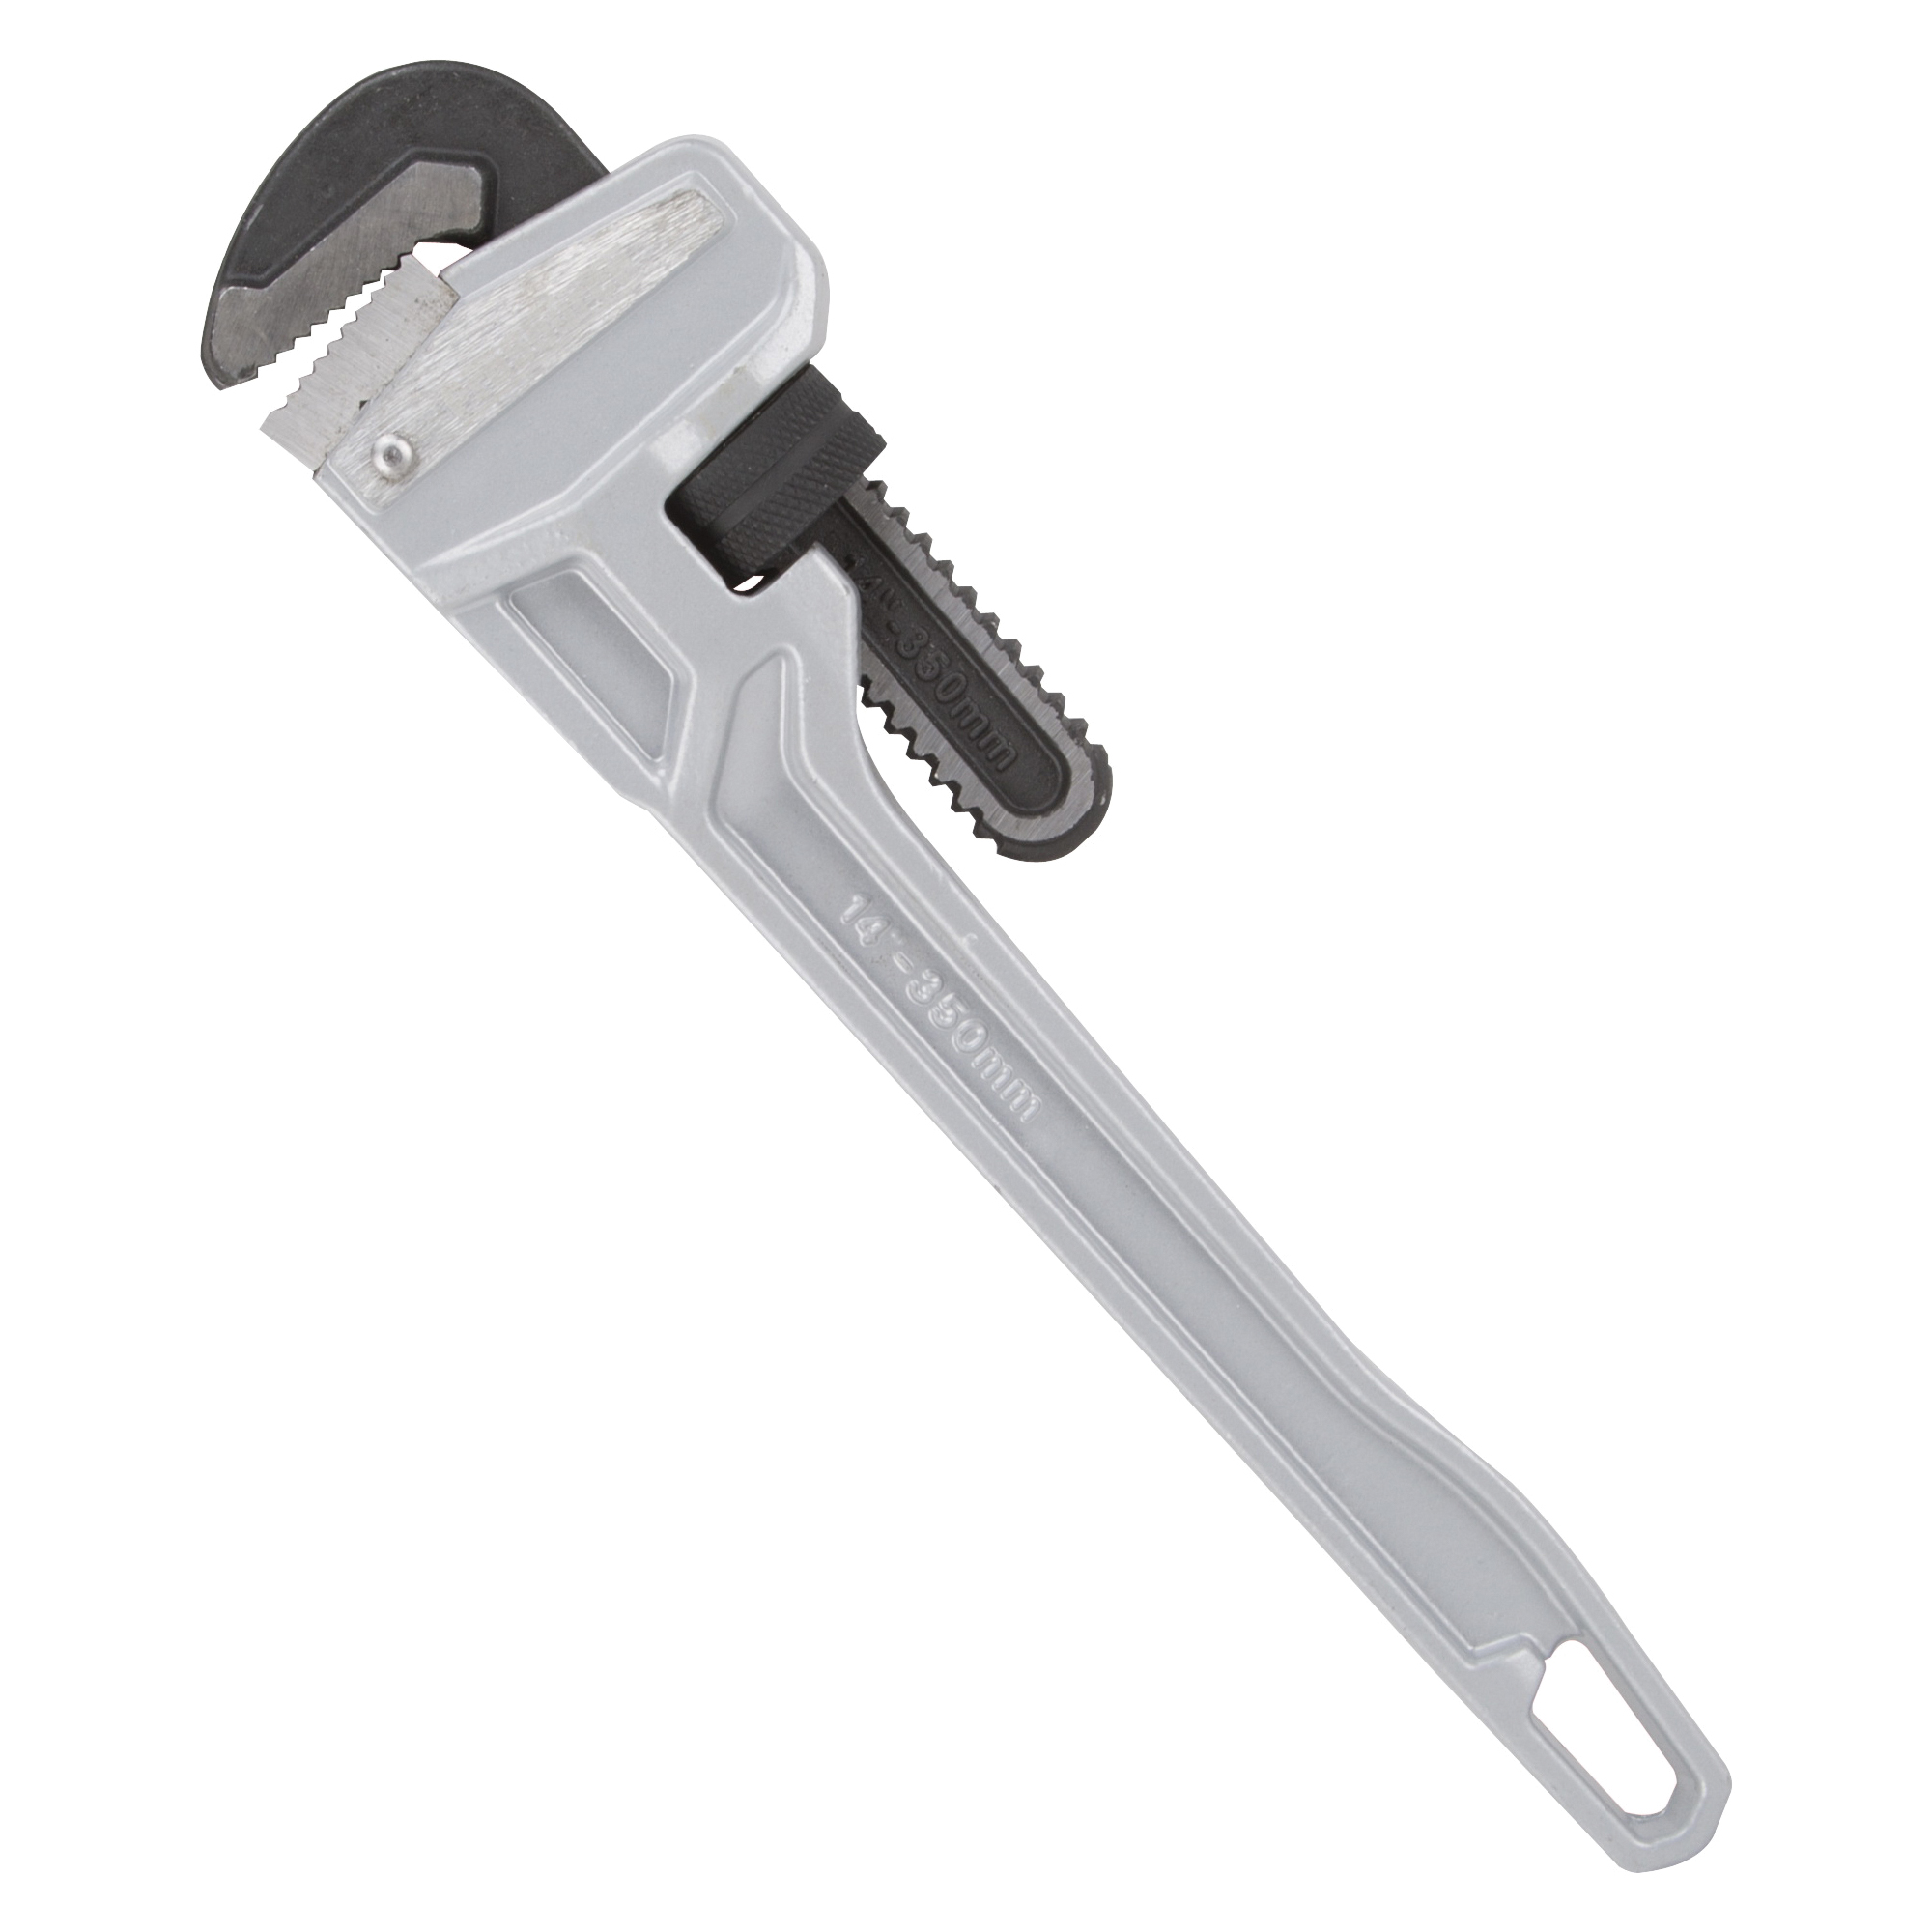 Vulcan JL40140 Pipe Wrench, 38 mm Jaw, 14 in L, Serrated Jaw, Aluminum, Powder-Coated, Heavy-Duty Handle